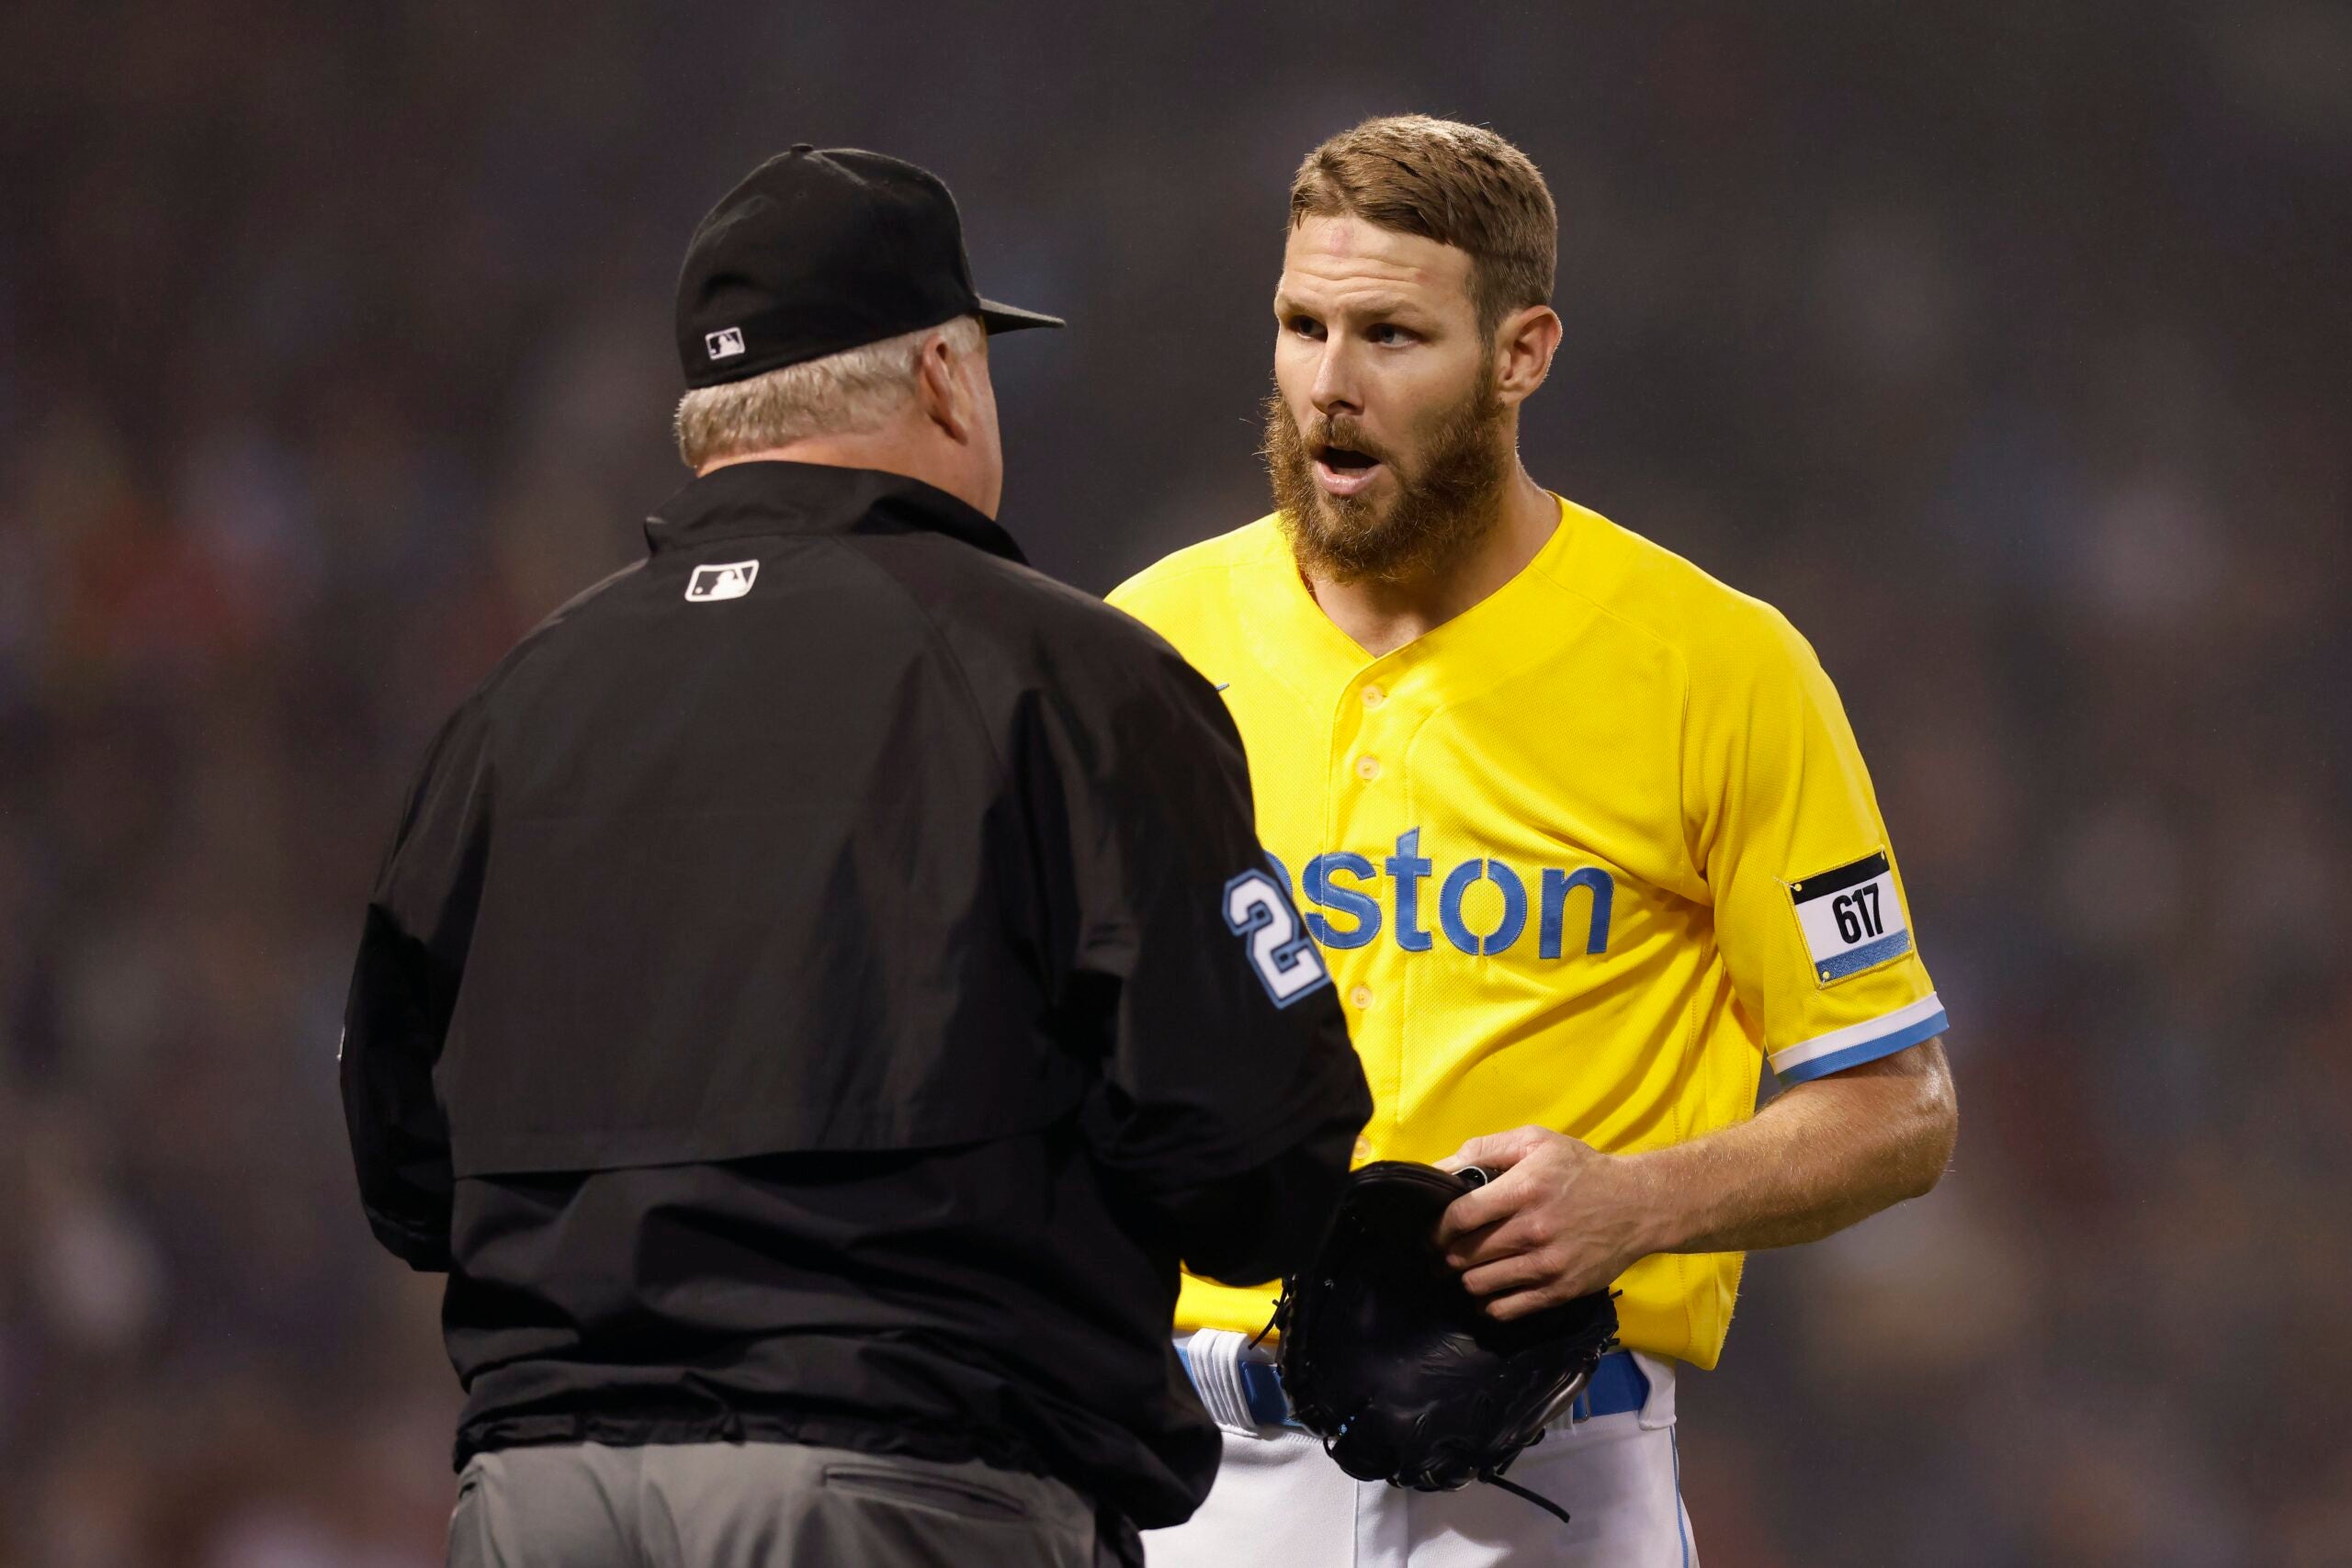 Chris Sale reportedly sent home over refusal to wear throwback uniforms